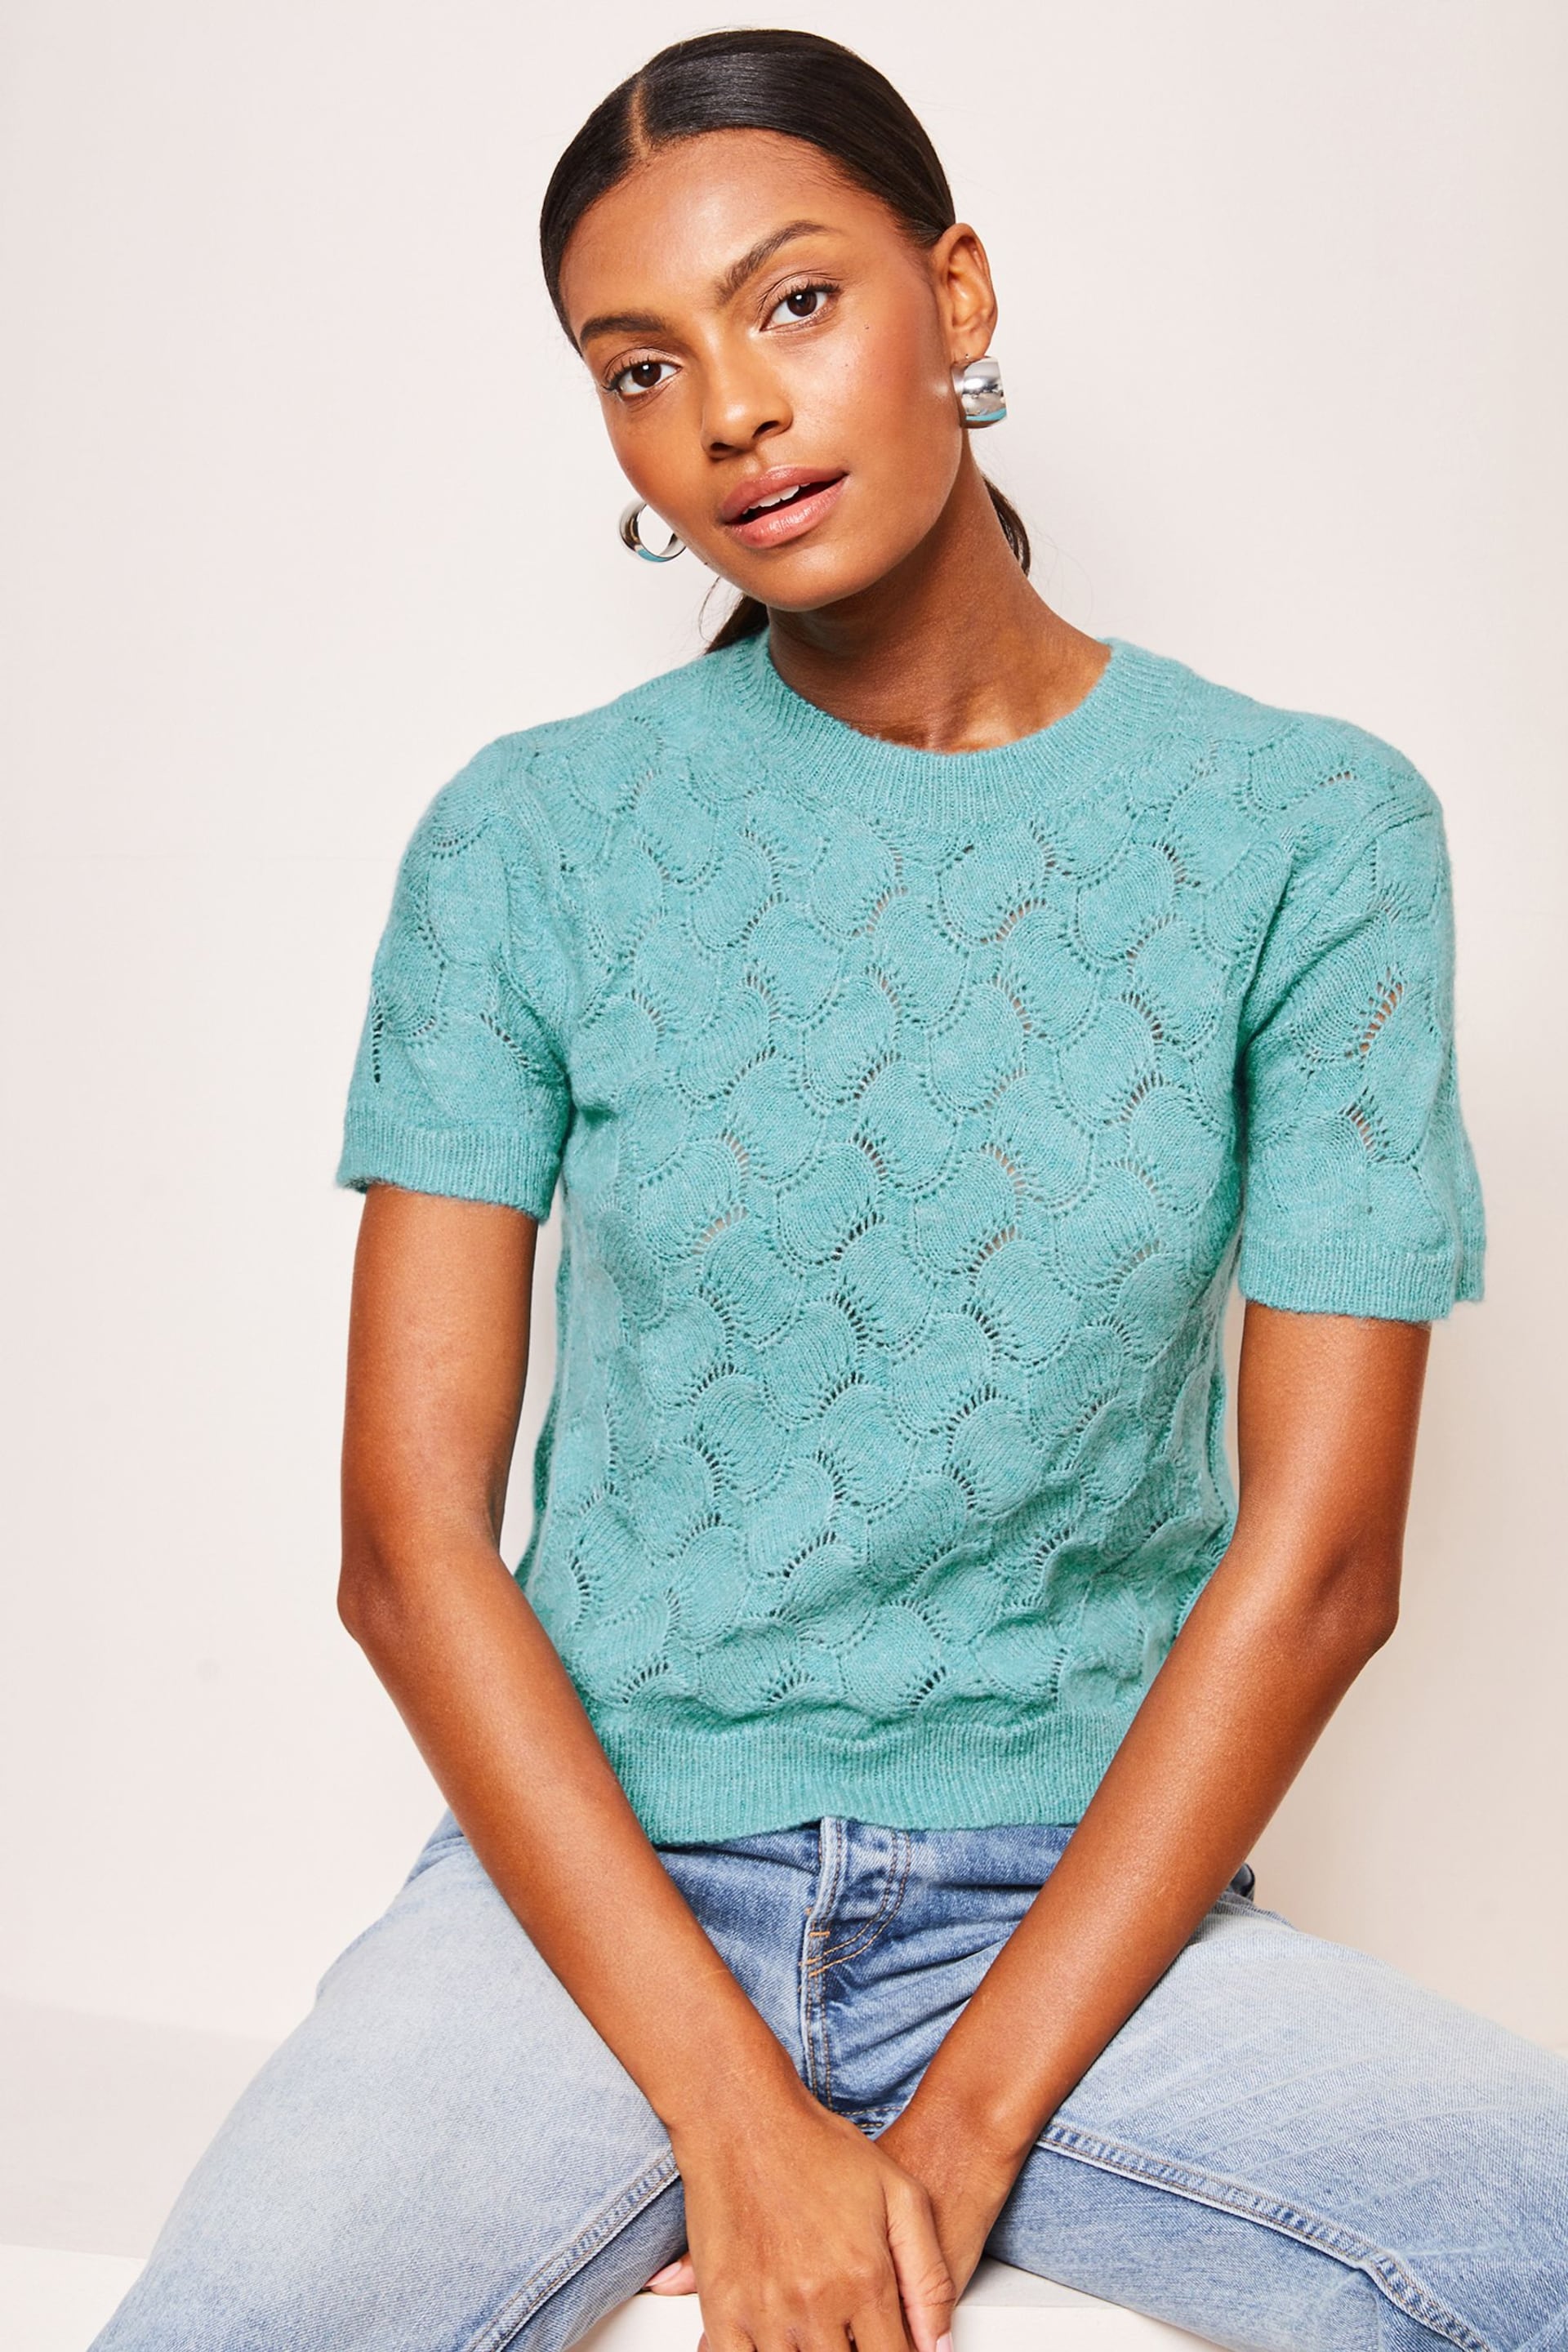 Lipsy Teal Blue Short Sleeve Patterned Knit Top - Image 1 of 4